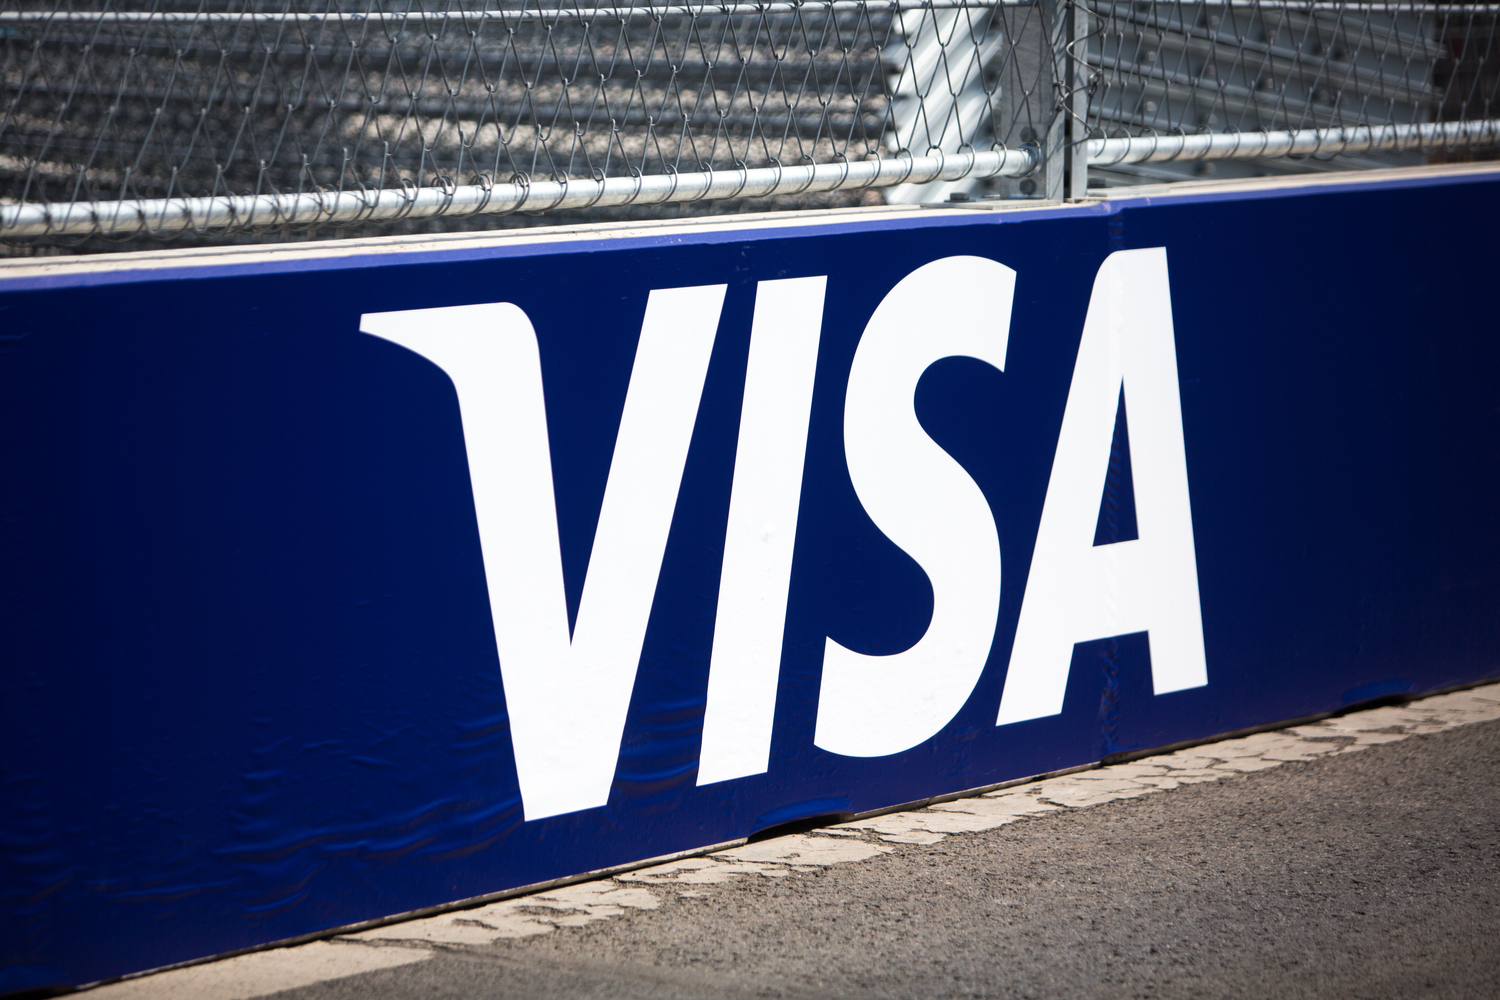 Visa-patent-filing-would-allow-central-banks-to-mint-digital-fiat-currencies-using-blockchain